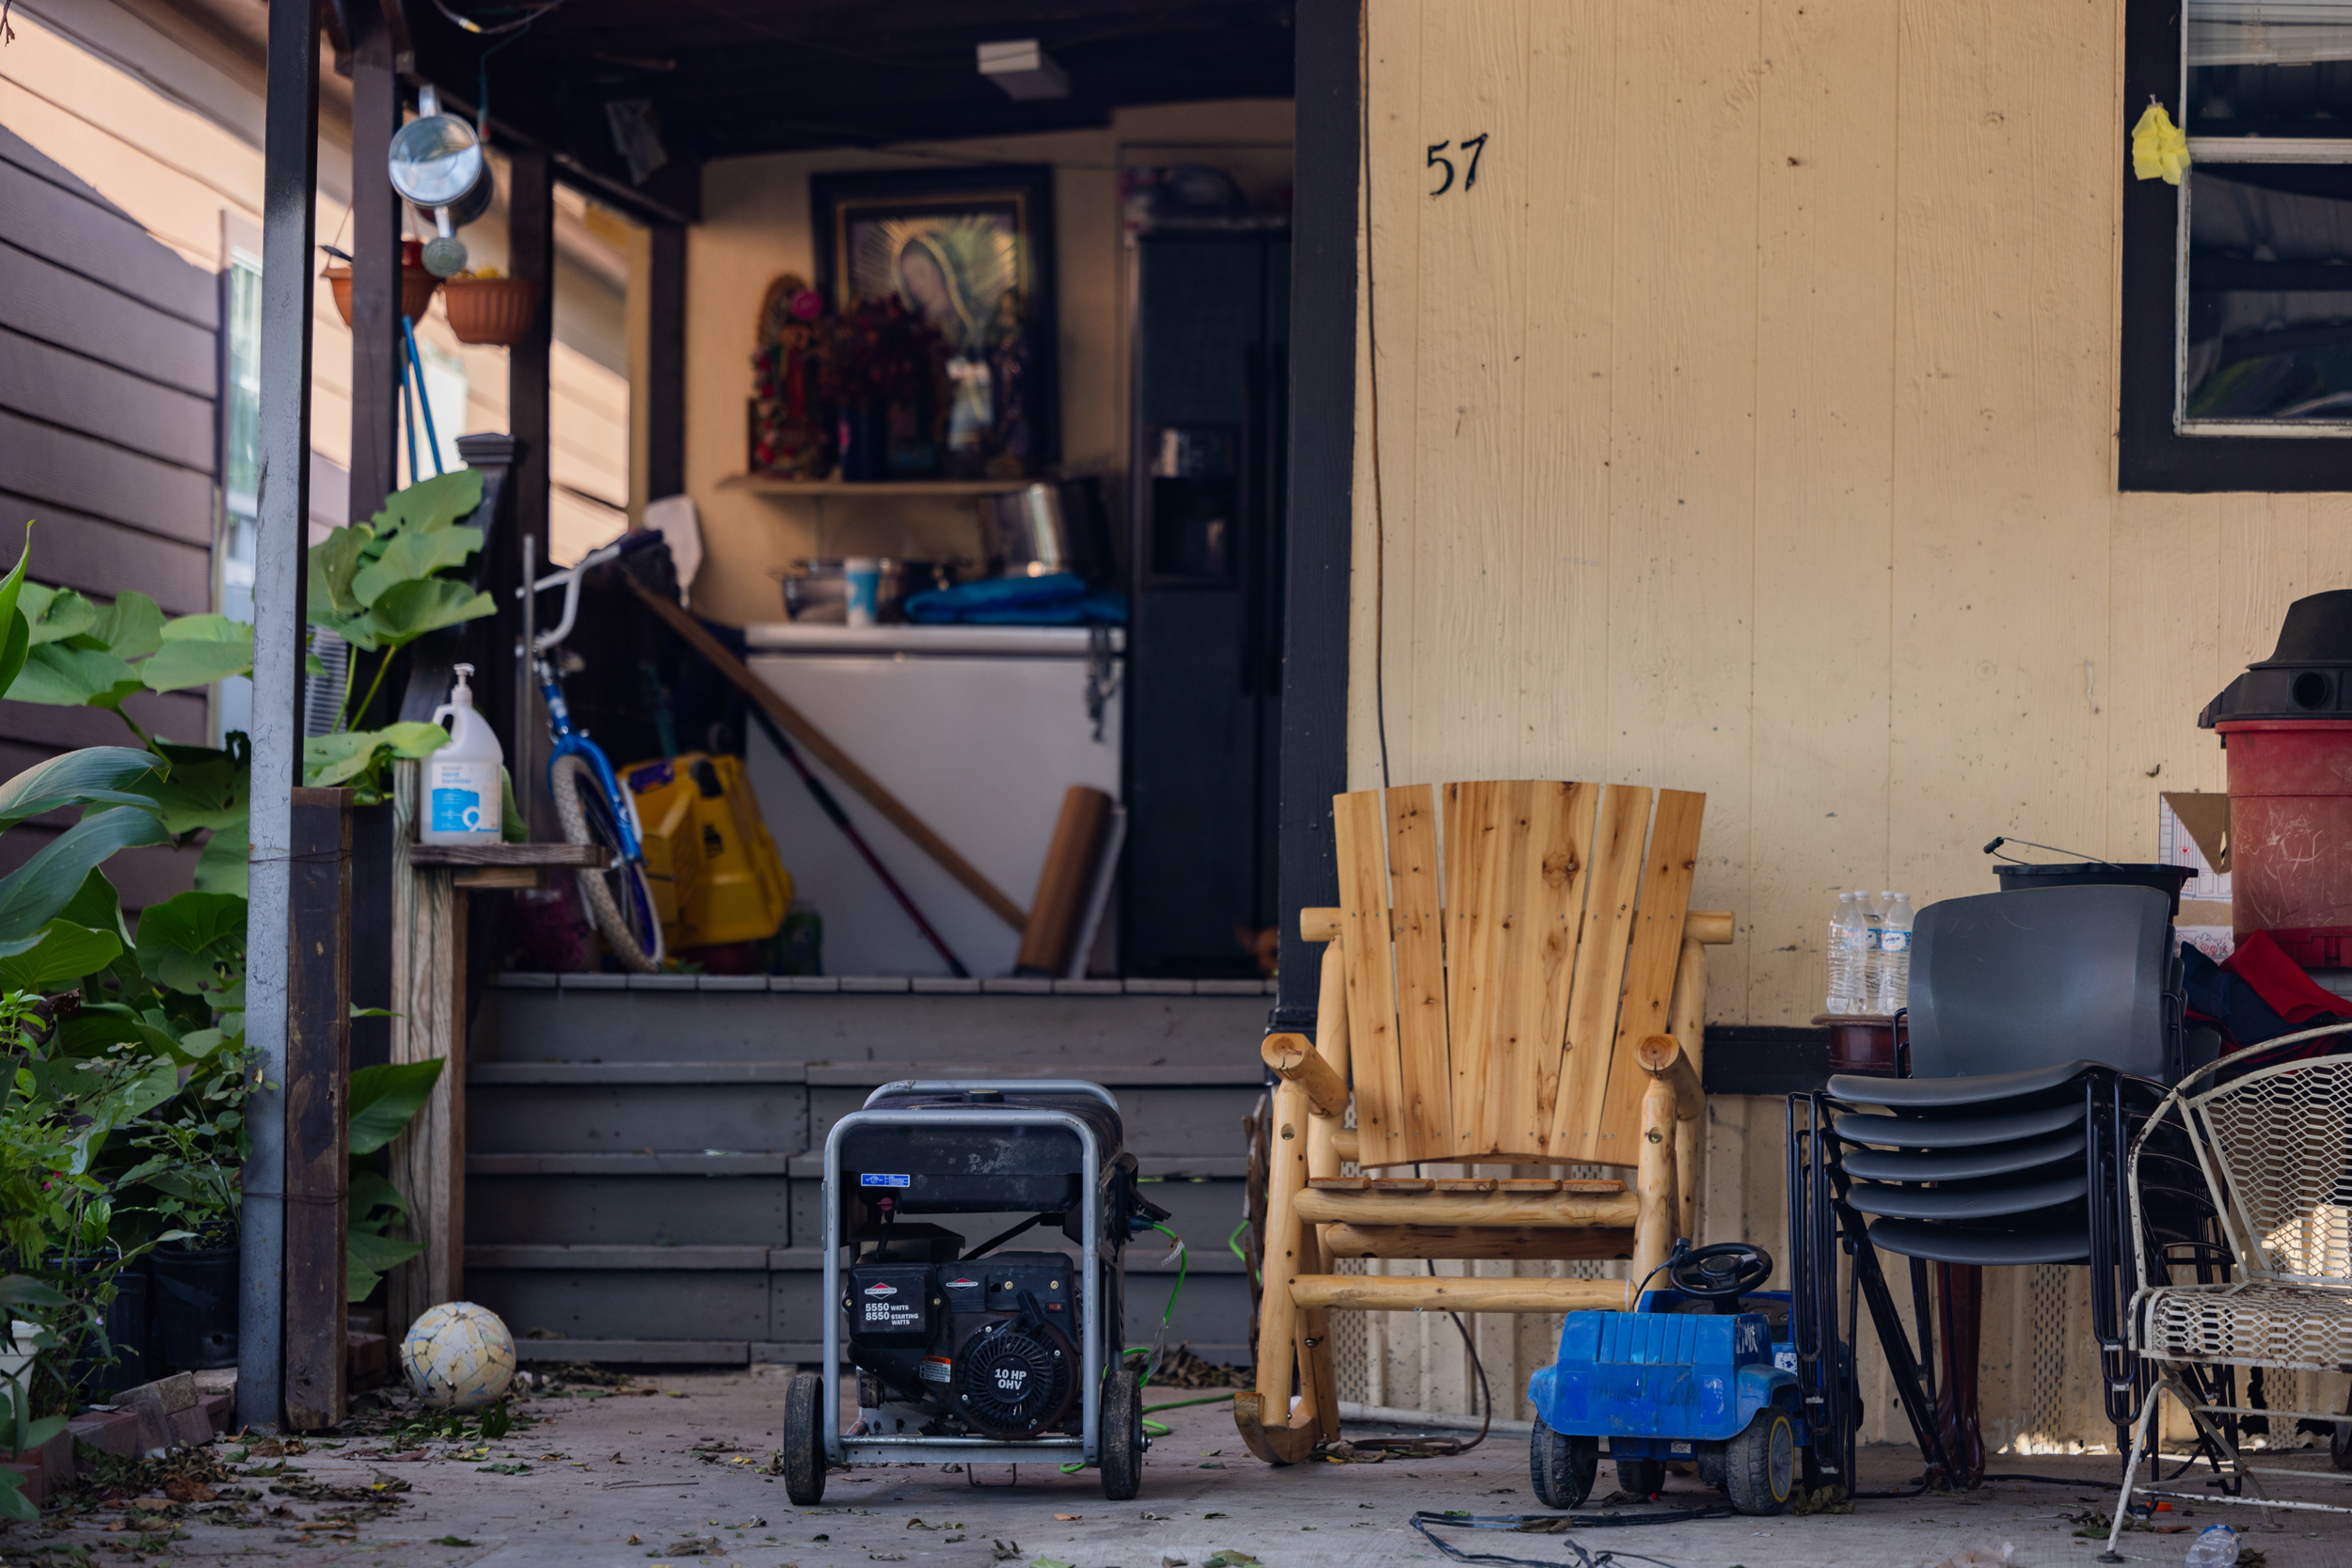 An electric generator provides electricity to a mobile home in Greenspoint